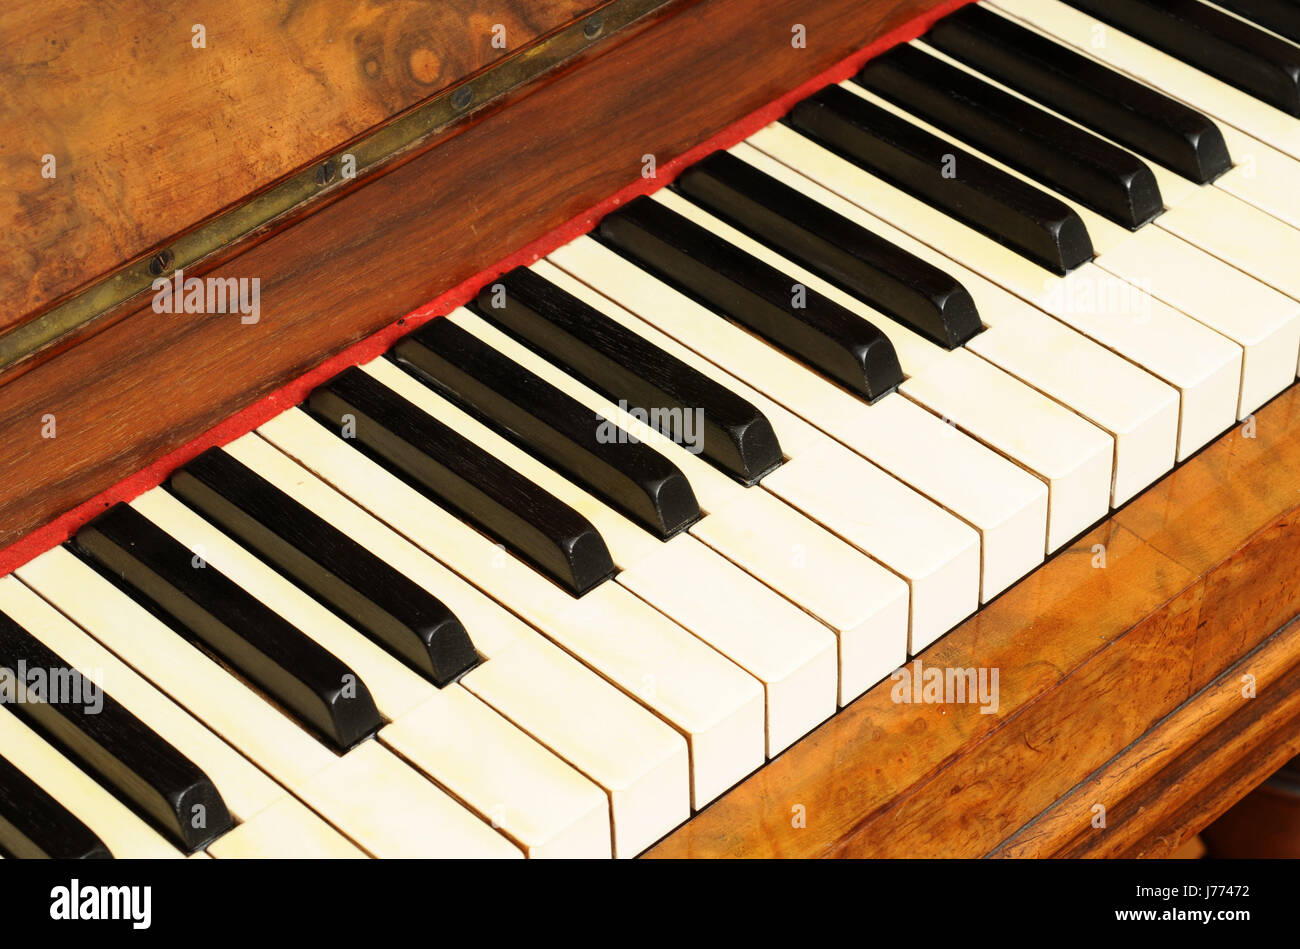 antique ivory piano key keyboard music game tournament play playing plays  Stock Photo - Alamy